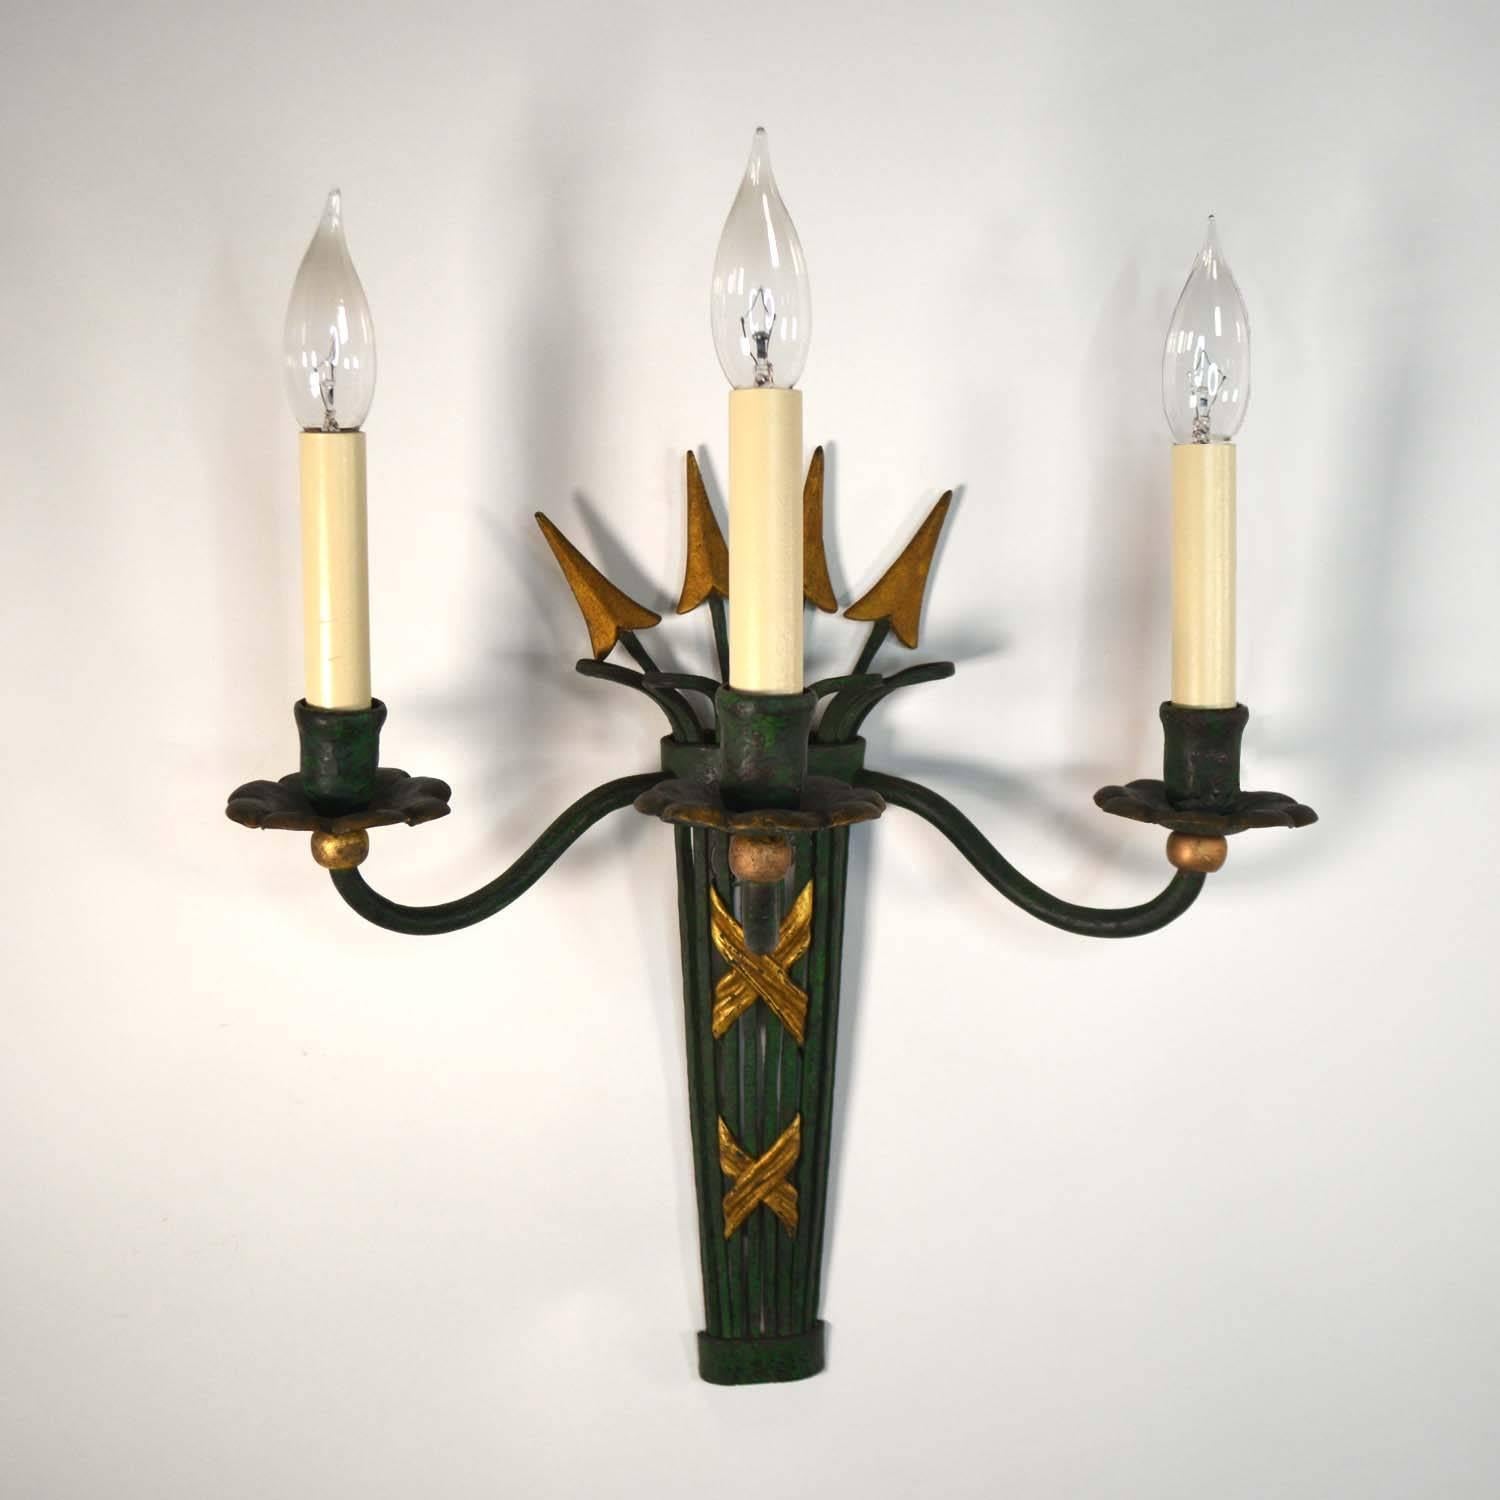 A pair of Hollywood Regency painted metal three light sconces in the form of a quiver holding arrows with gold ends. Most likely French, 1940s or 1950s.